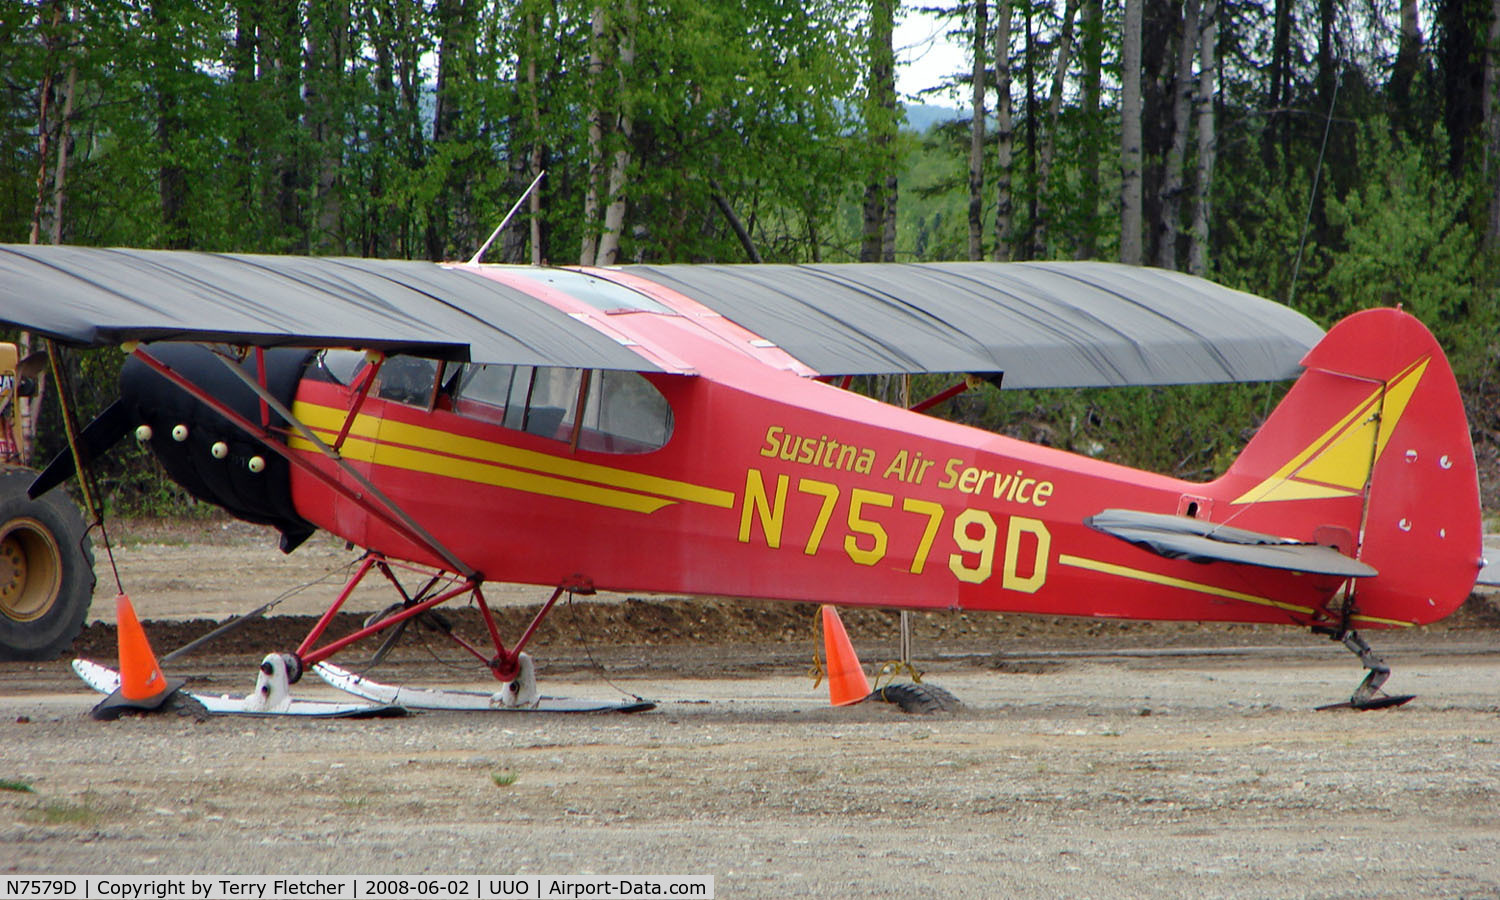 N7579D, 1957 Piper PA-18-150 Super Cub C/N 18-5867, Susitna Air Services Piper Pa-18-150 at Willow Airport